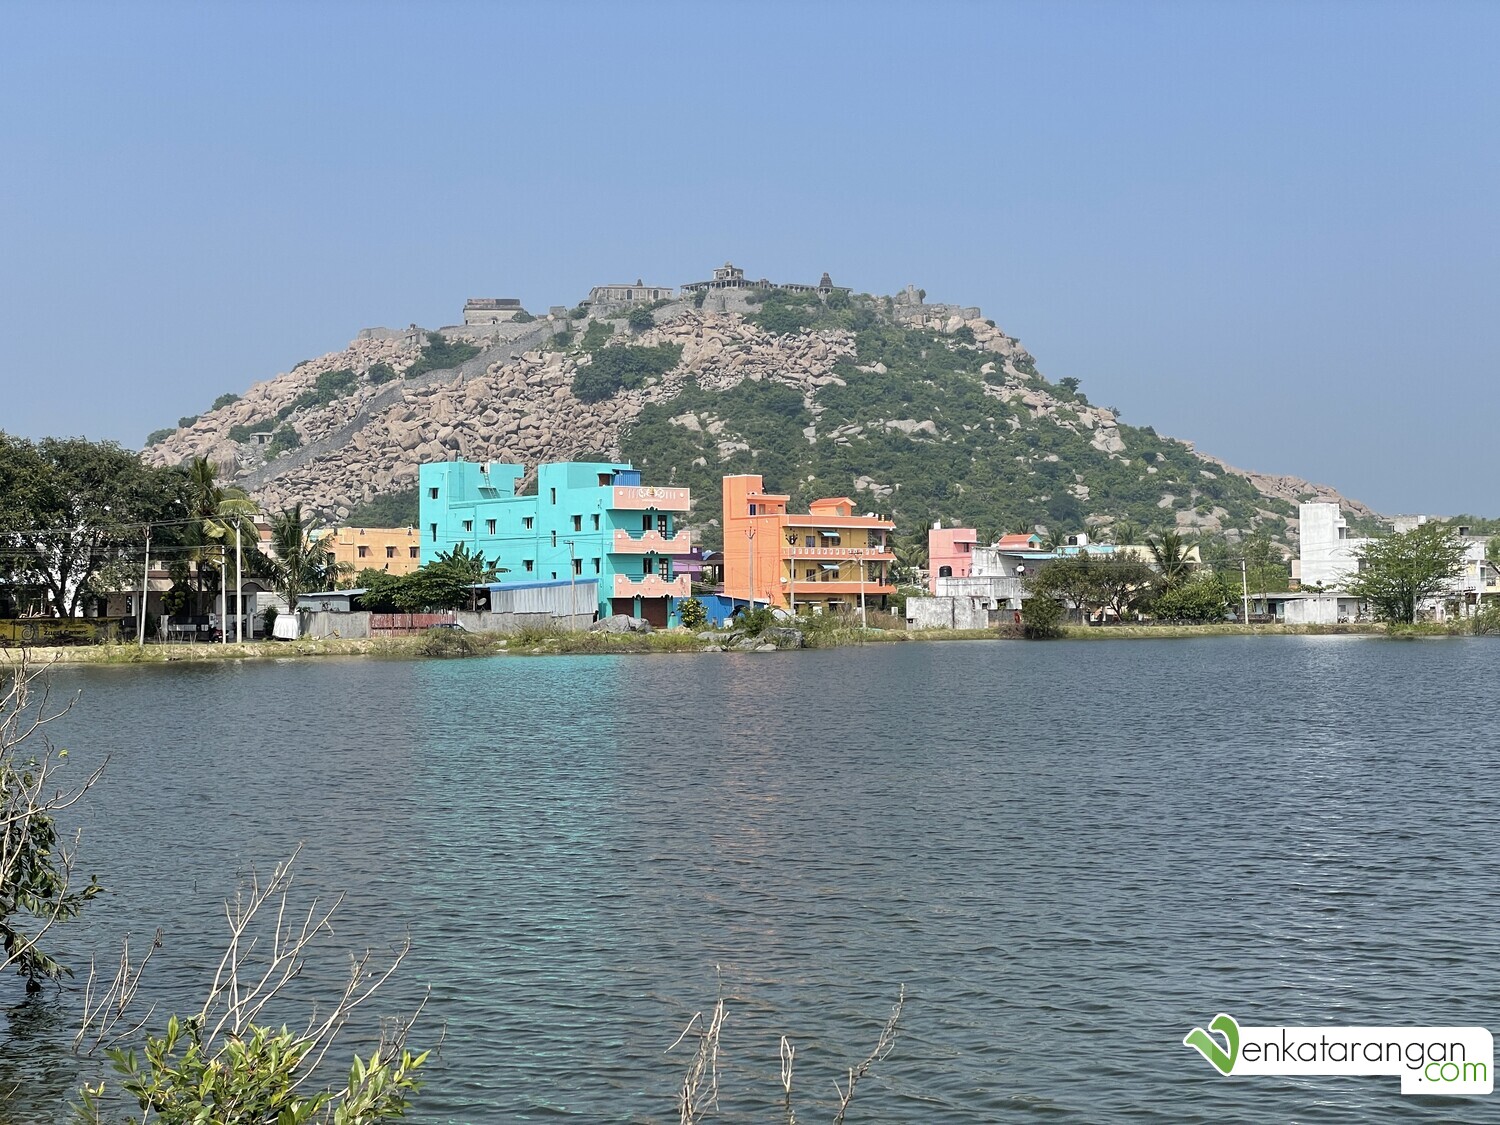 View of Rani fort from a lake on the way from the Gingee town